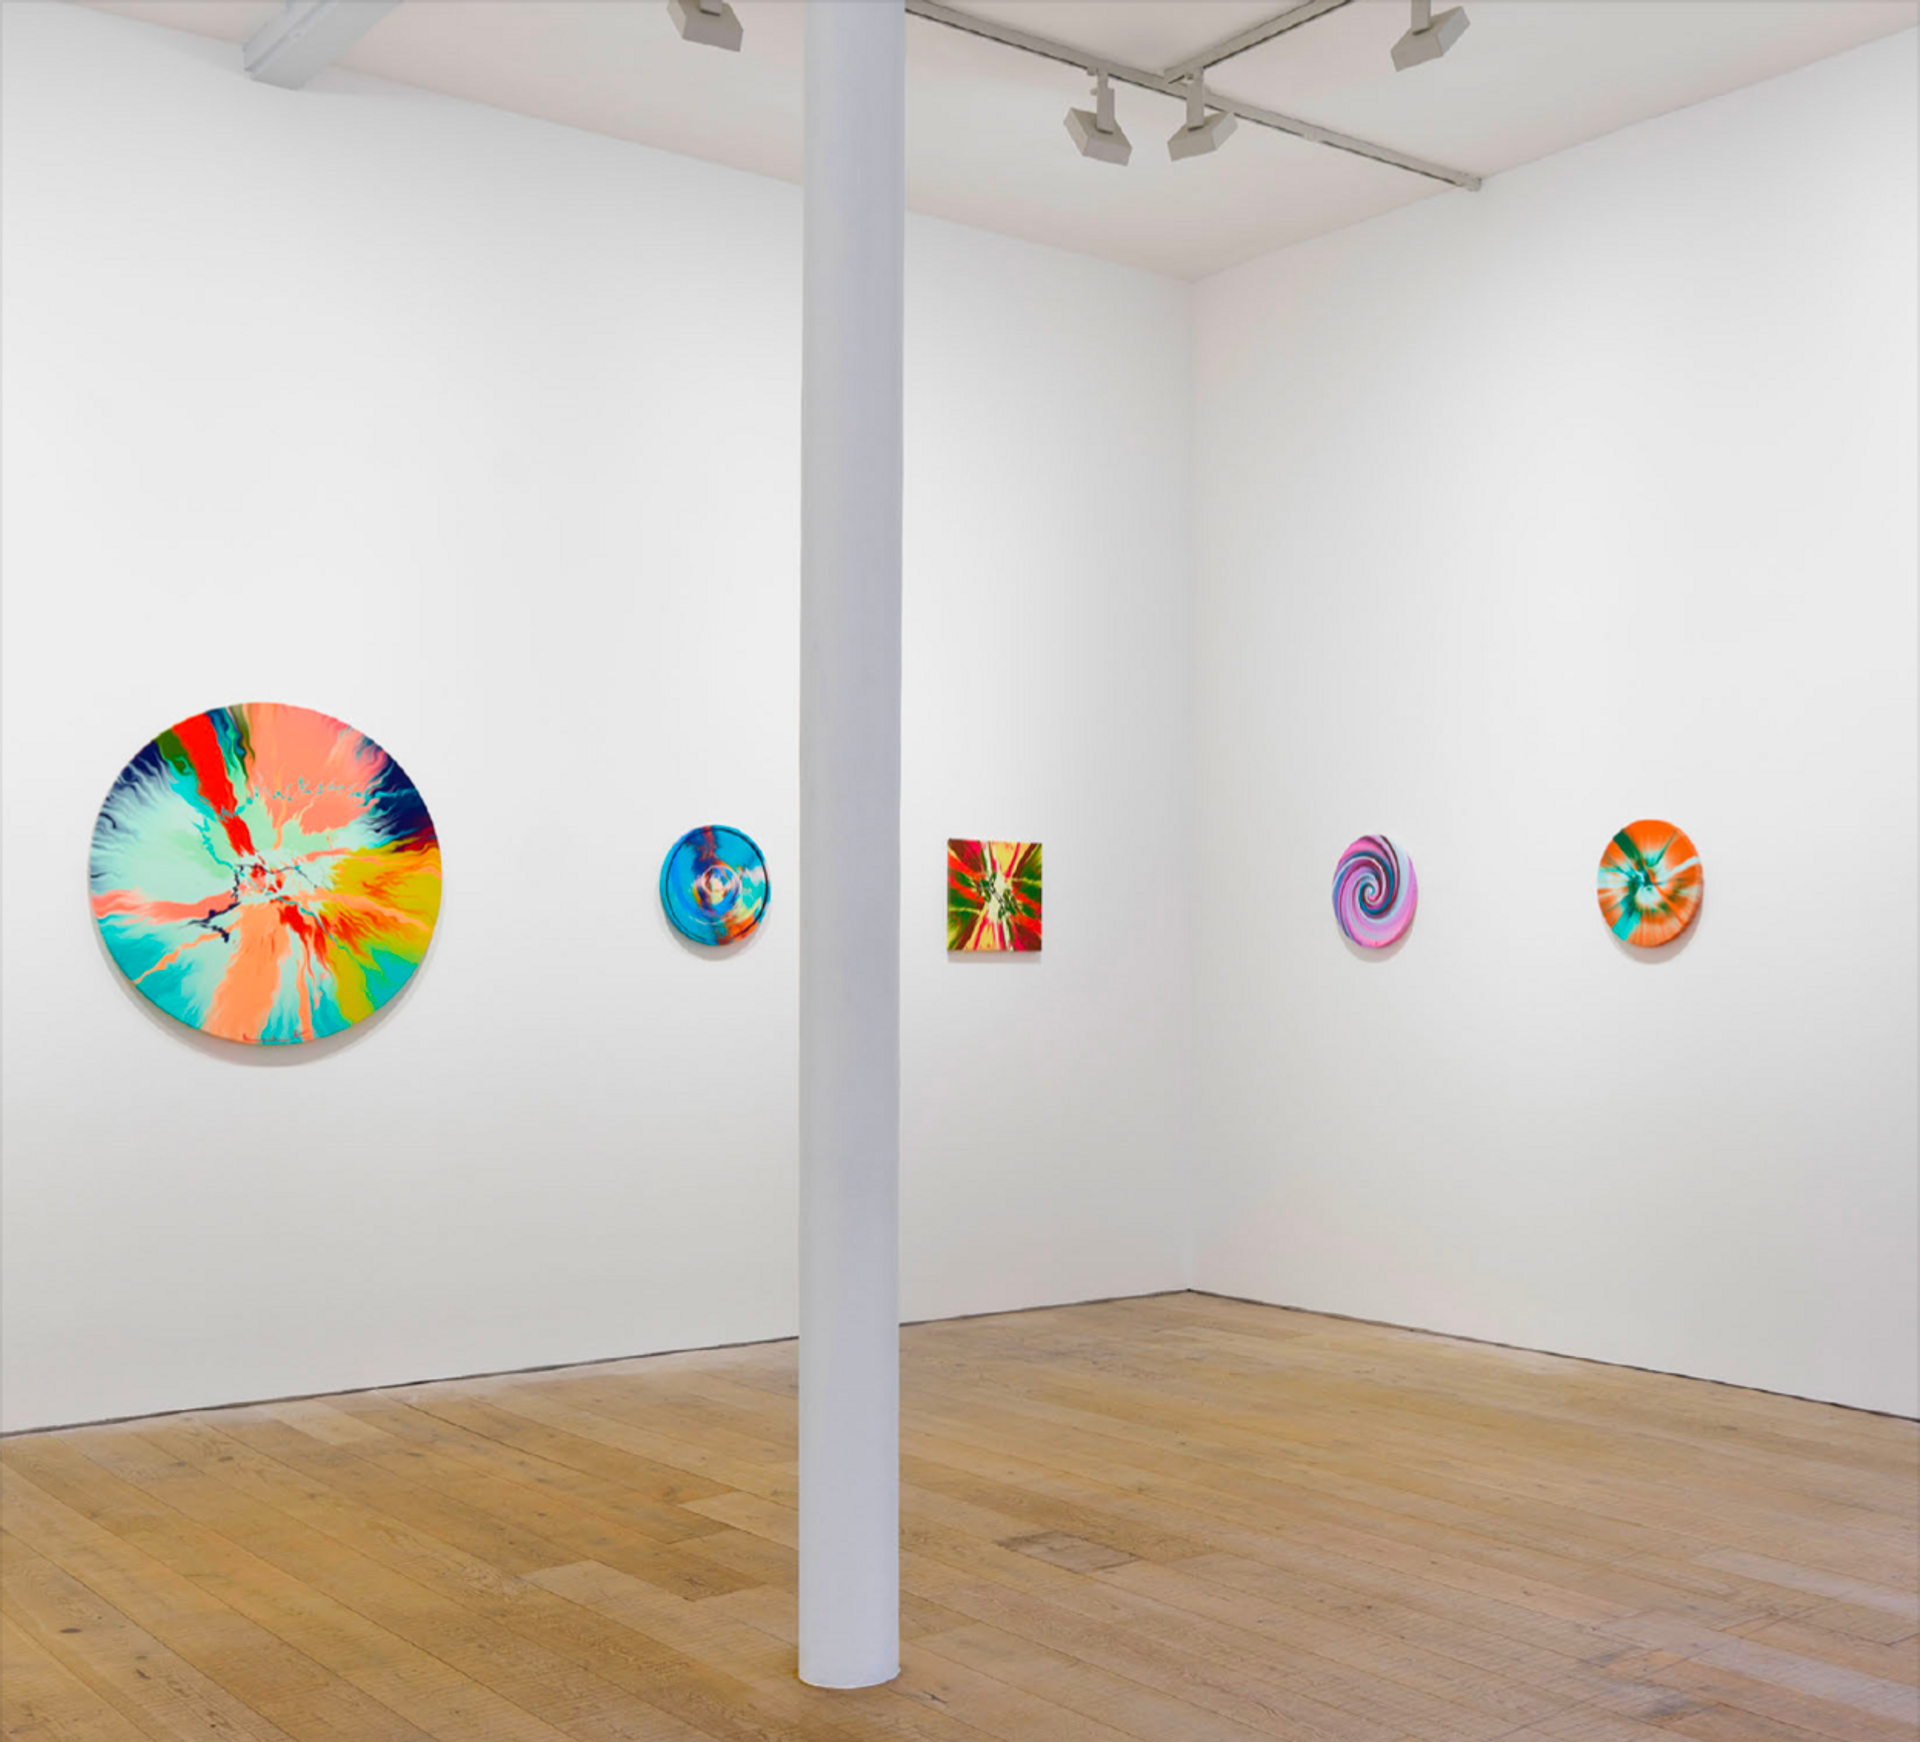 Installation view of Damien Hirst's The Beautiful Paintings in a gallery room. The white gallery wall has a simple hang of the works, featuring four circular compositions and one square work, in varying colour palettes and sizes.